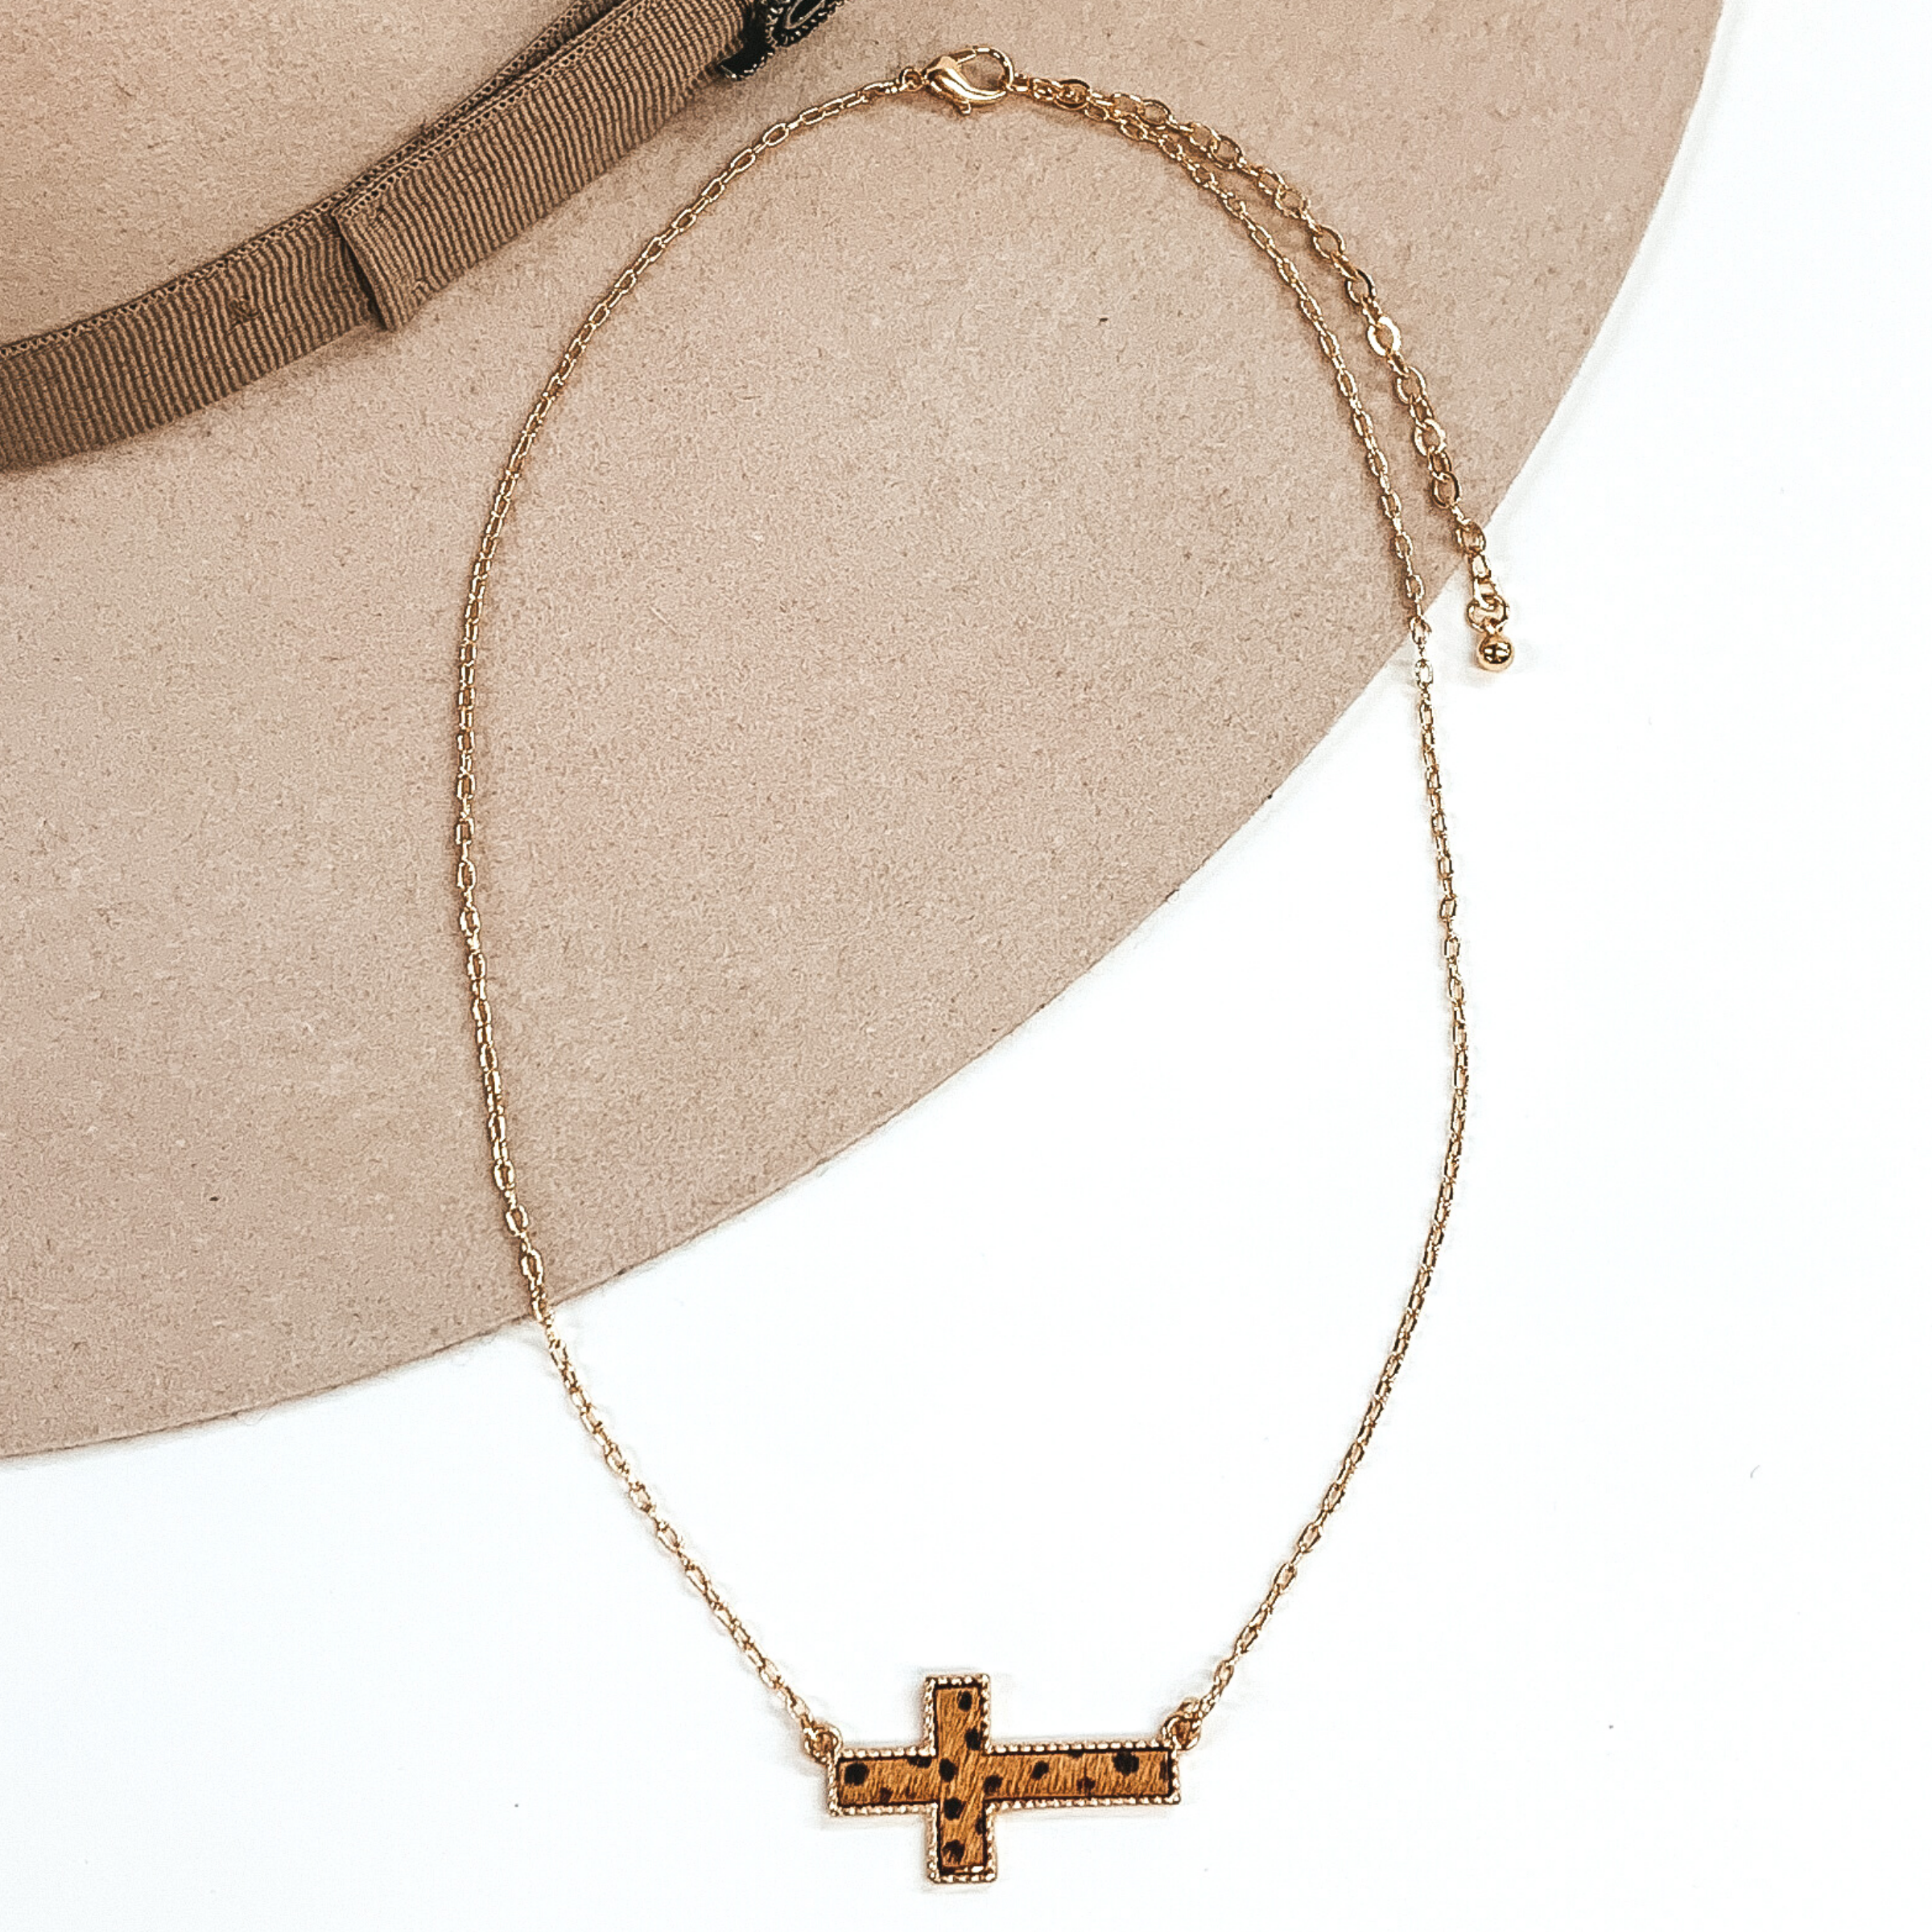 Gold paperclip chain with a cross pendant. The pendant has a brown hide inlay with black dots. this necklace is pictured on a white and beige background.